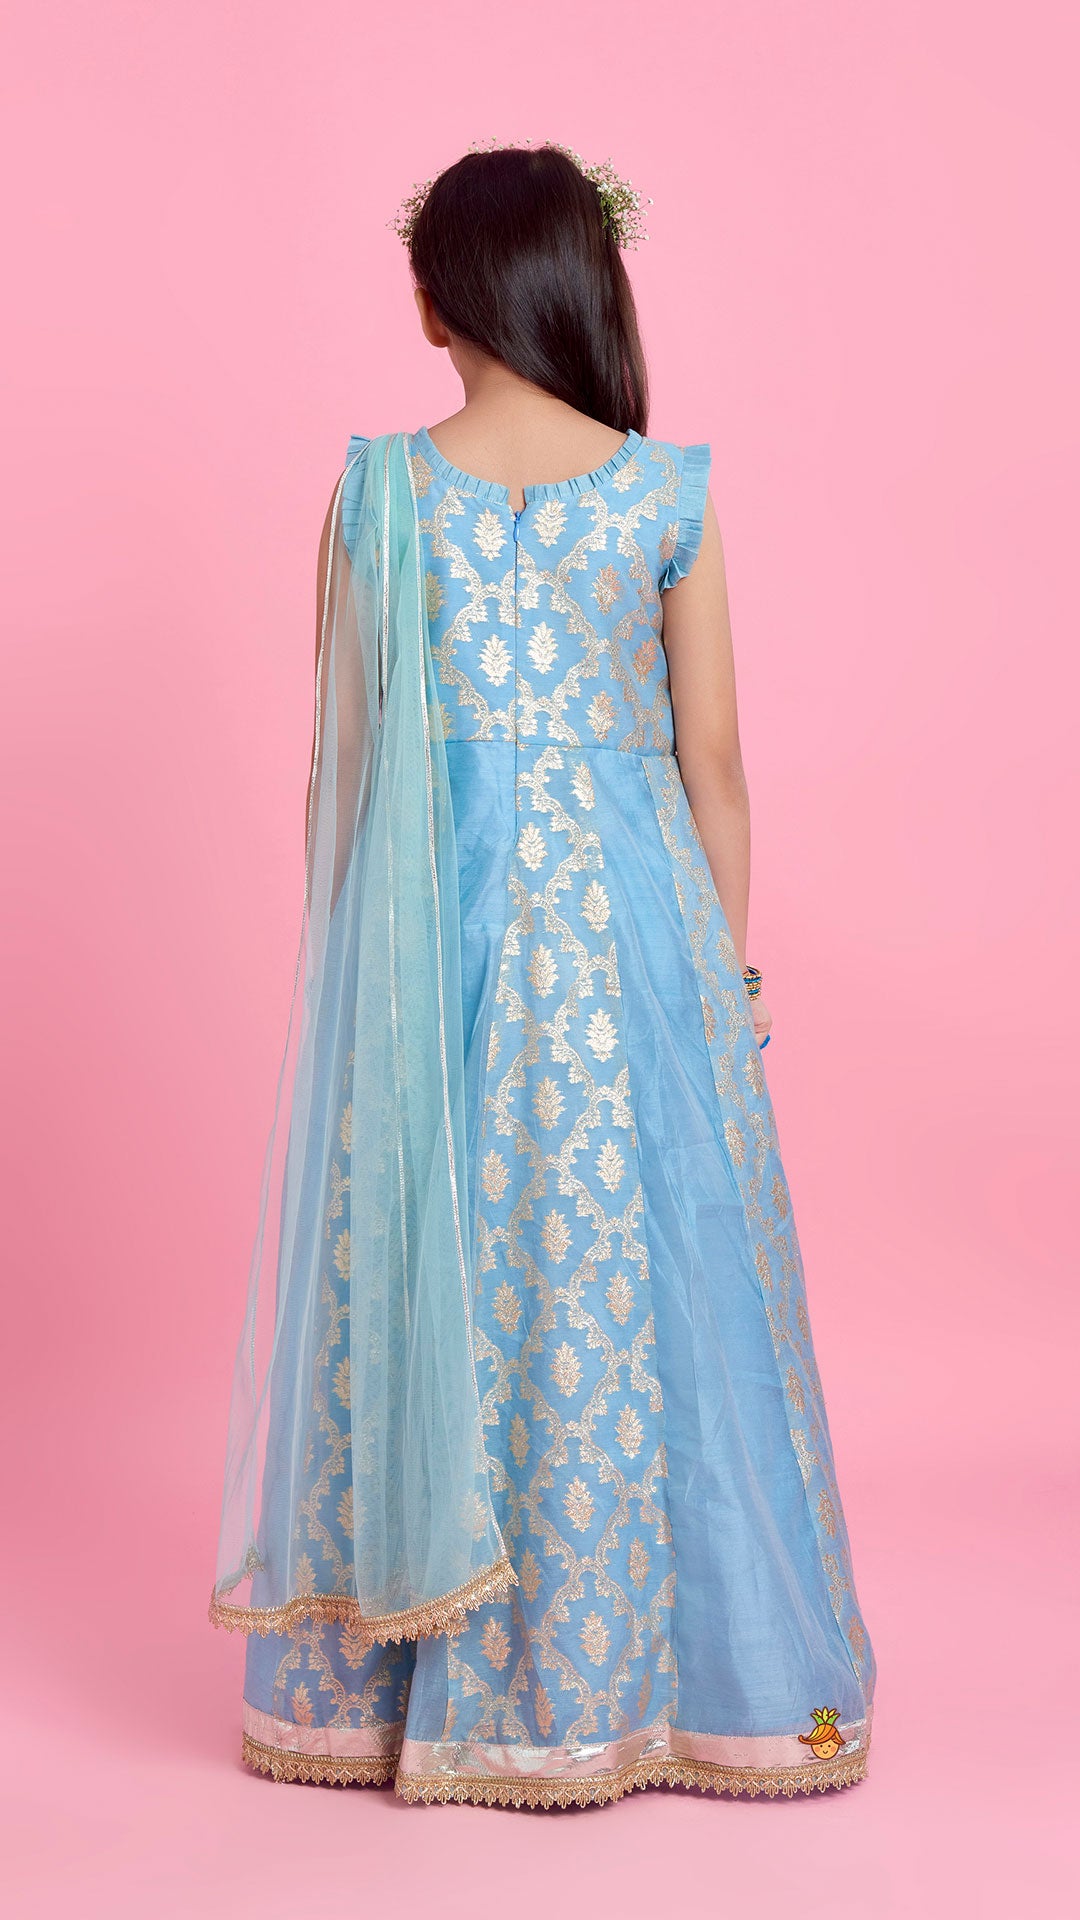 Zari Brocade Embroidered Lace Work Dress With Attached Drape Dupatta